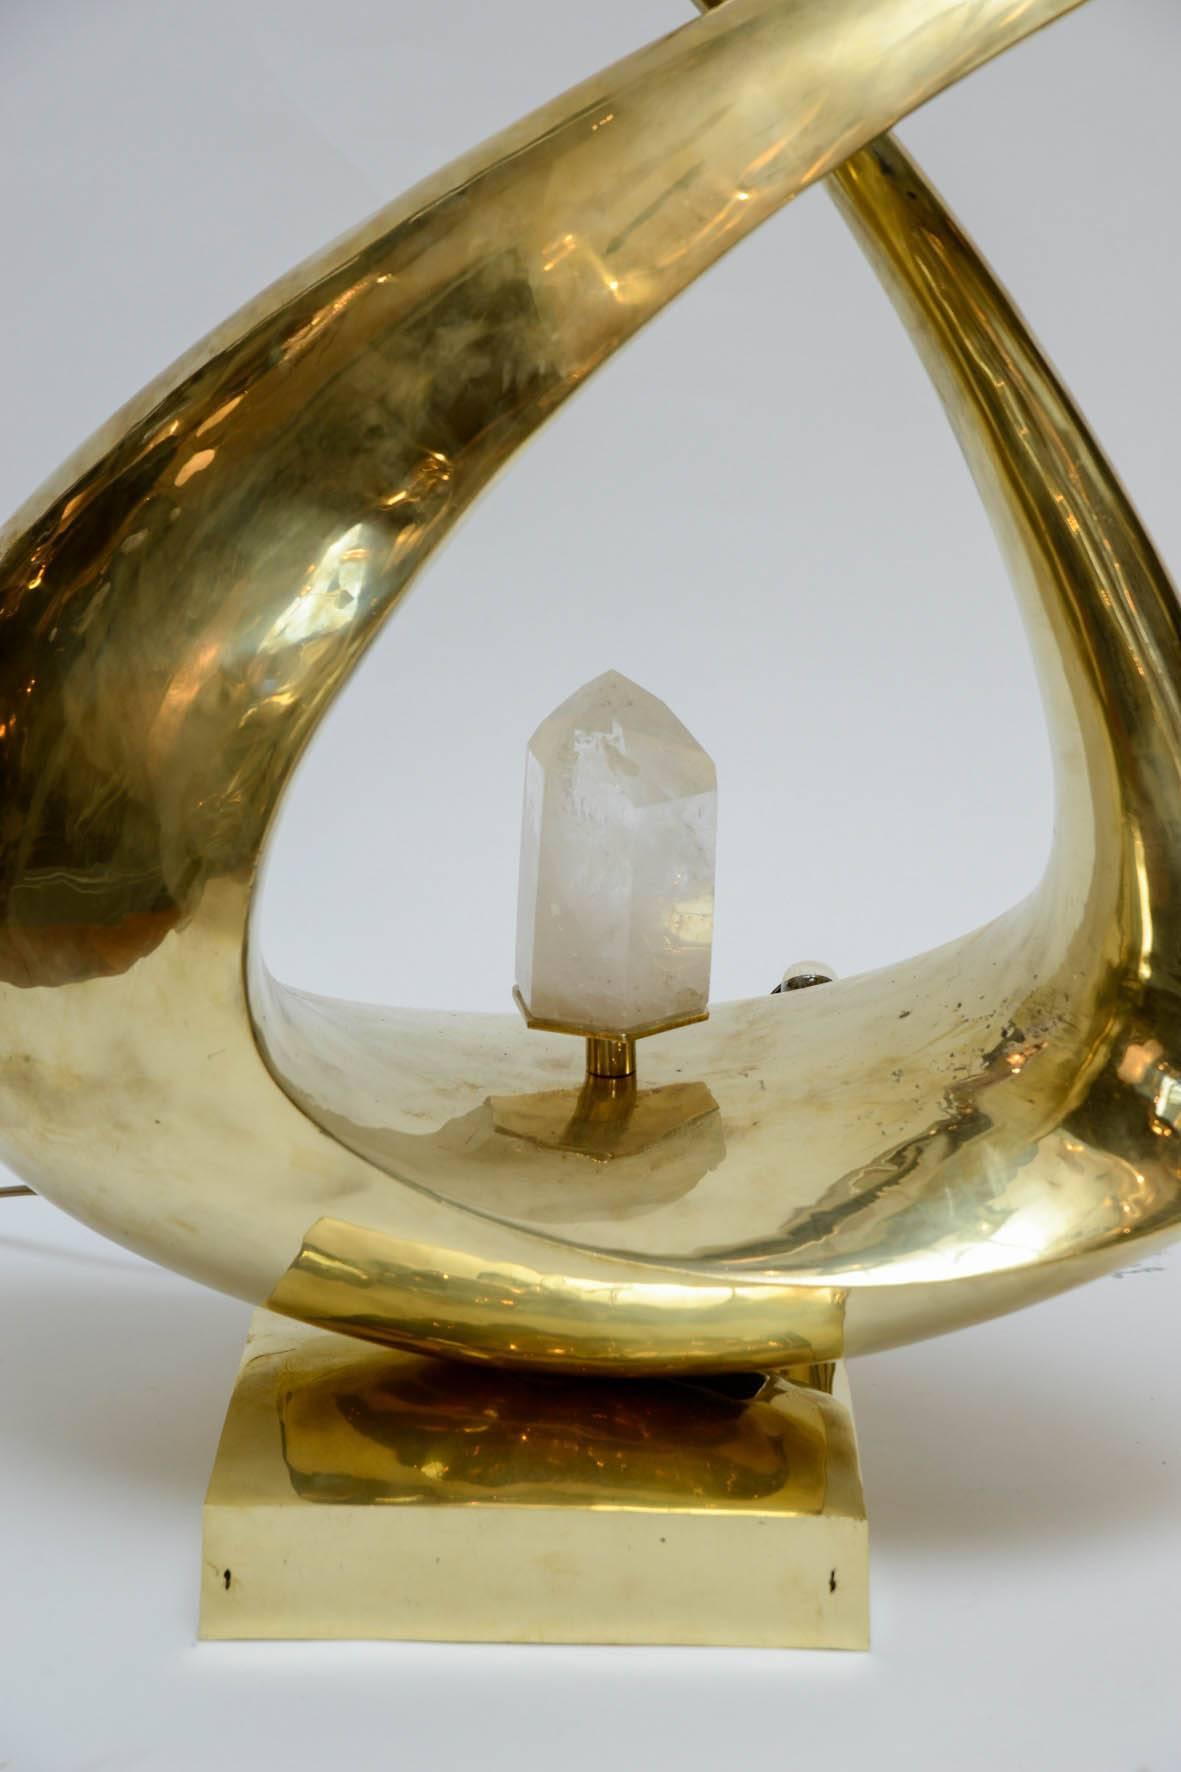 Luminous sculpture more than a lamp, this amazing piece signed by Georges Mathias is a work of art.

A one piece brass sculpture going both ways with a rock crystal in the middle diffusing the light.